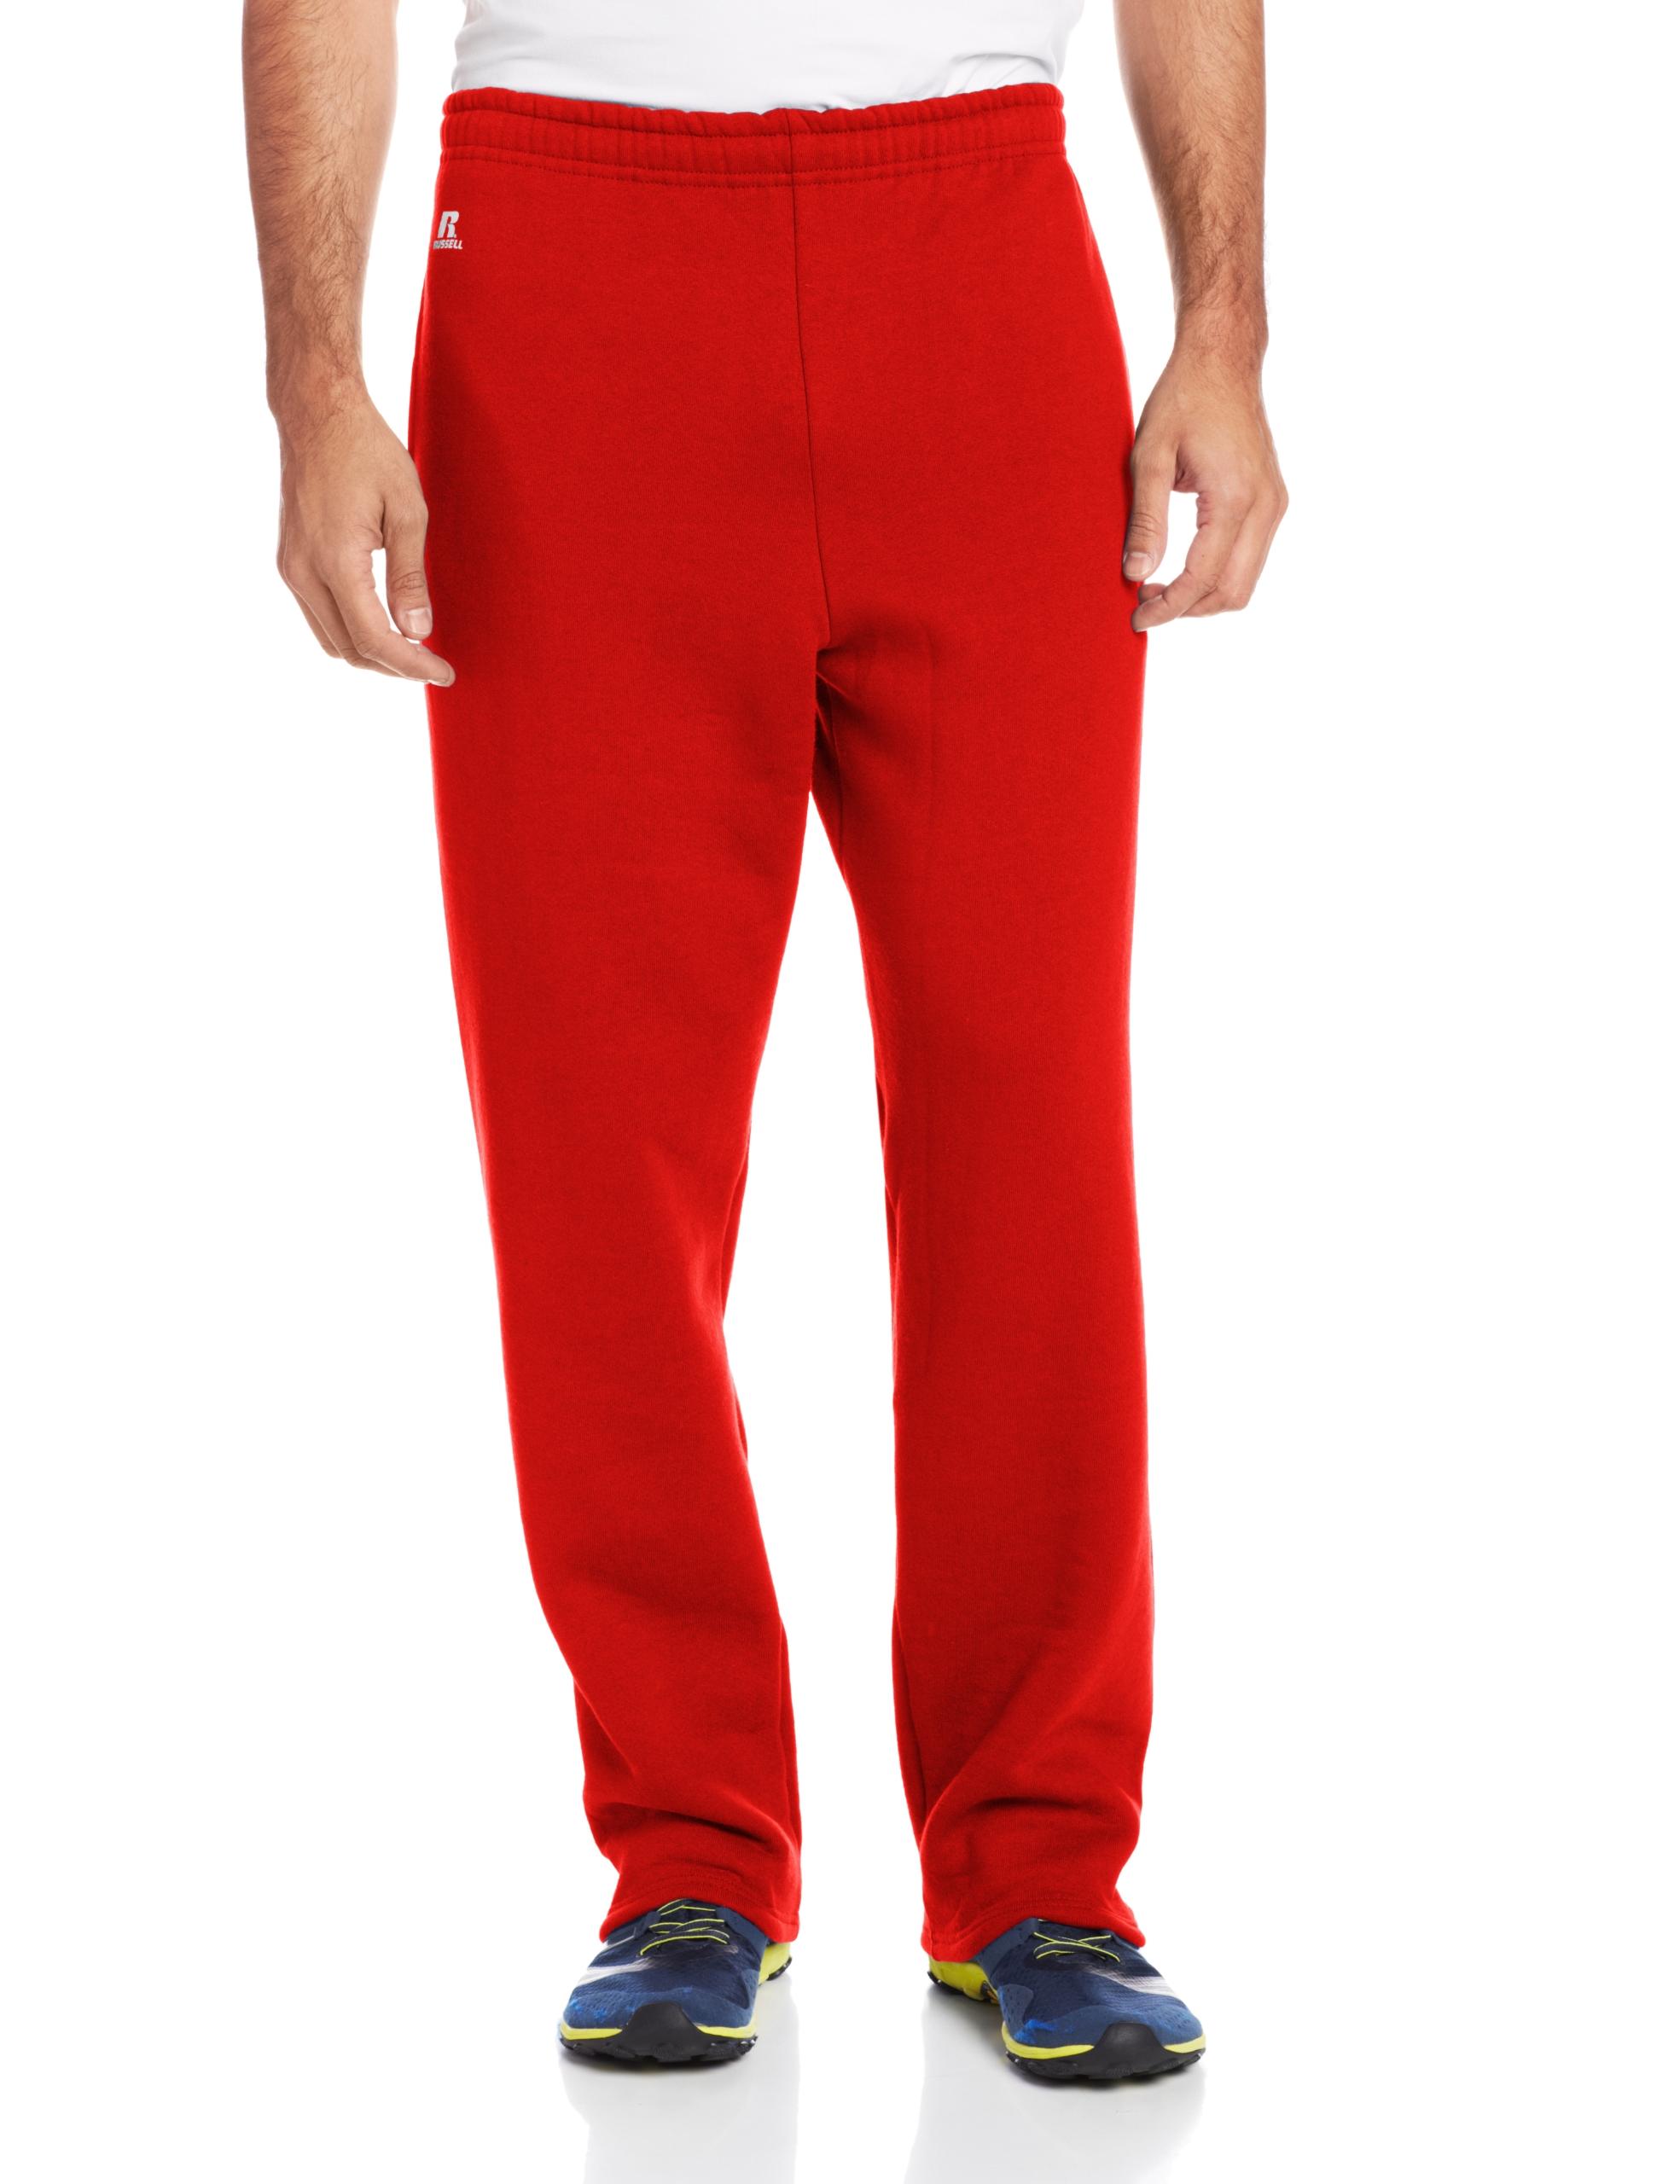 Russell Athletic Fleece Dri-power Open Bottom Sweatpants With Pockets ...